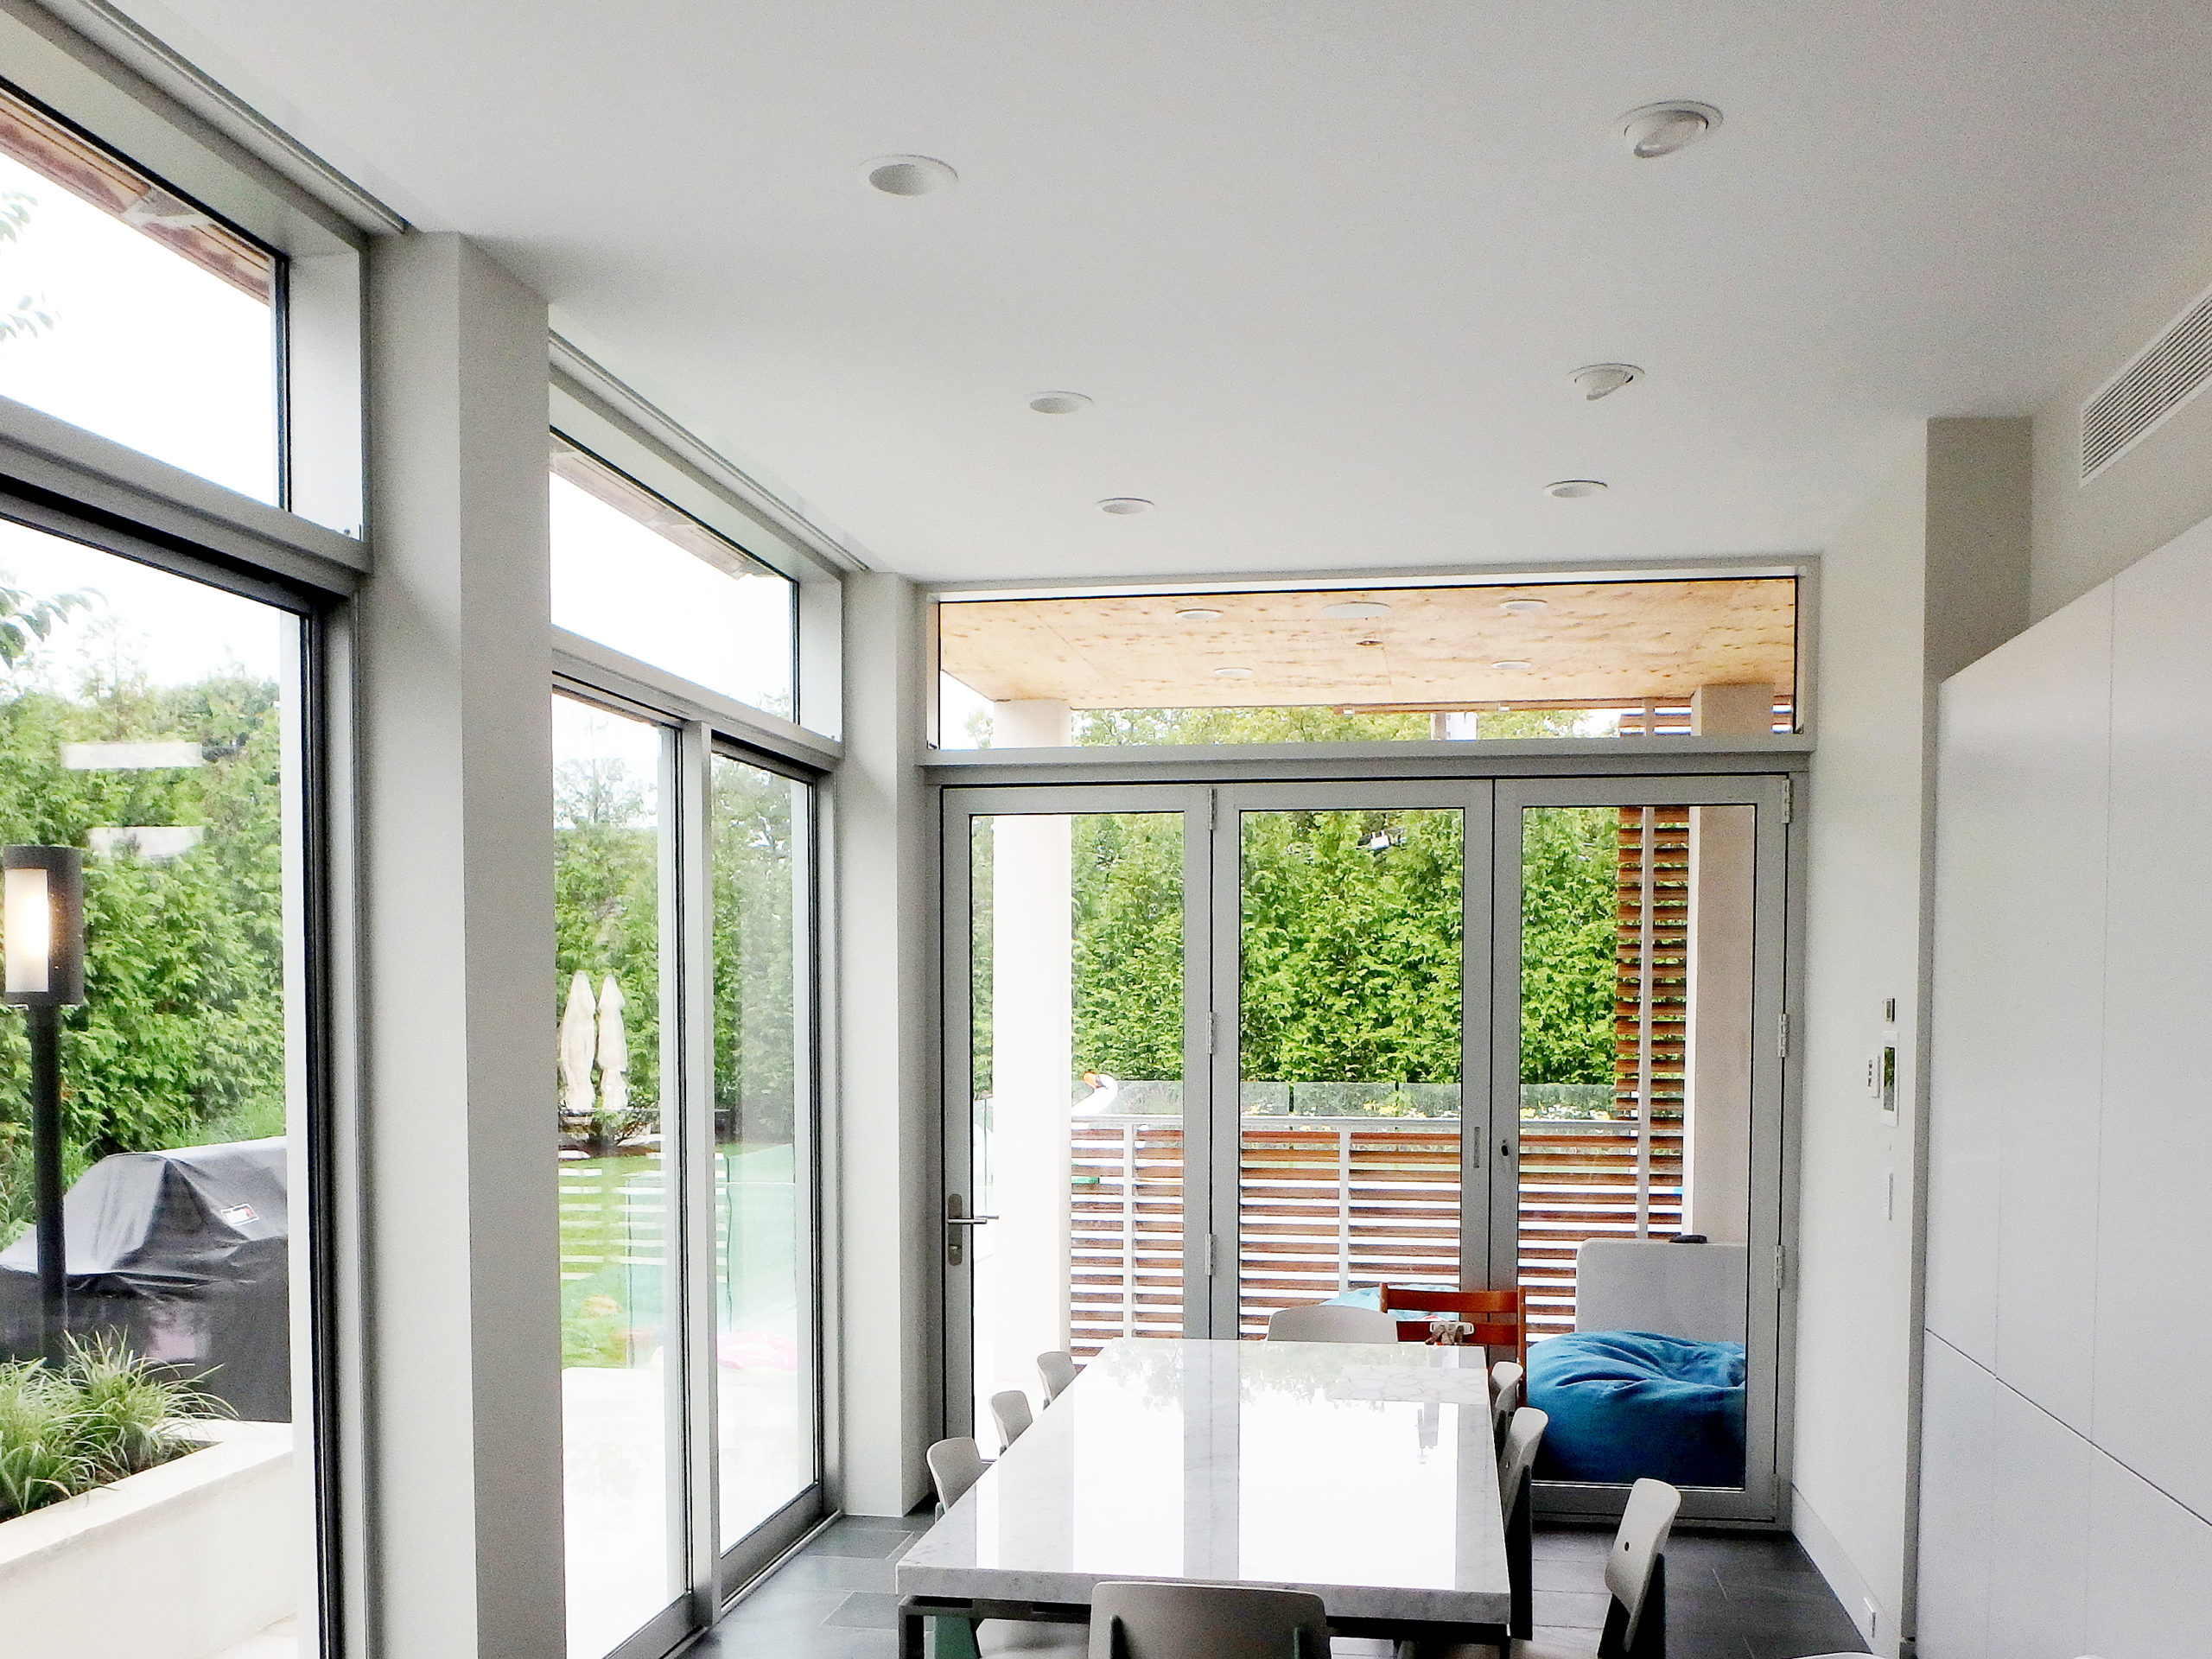 Solar's wide range of products allows a one-stop shop for all your glazing needs.